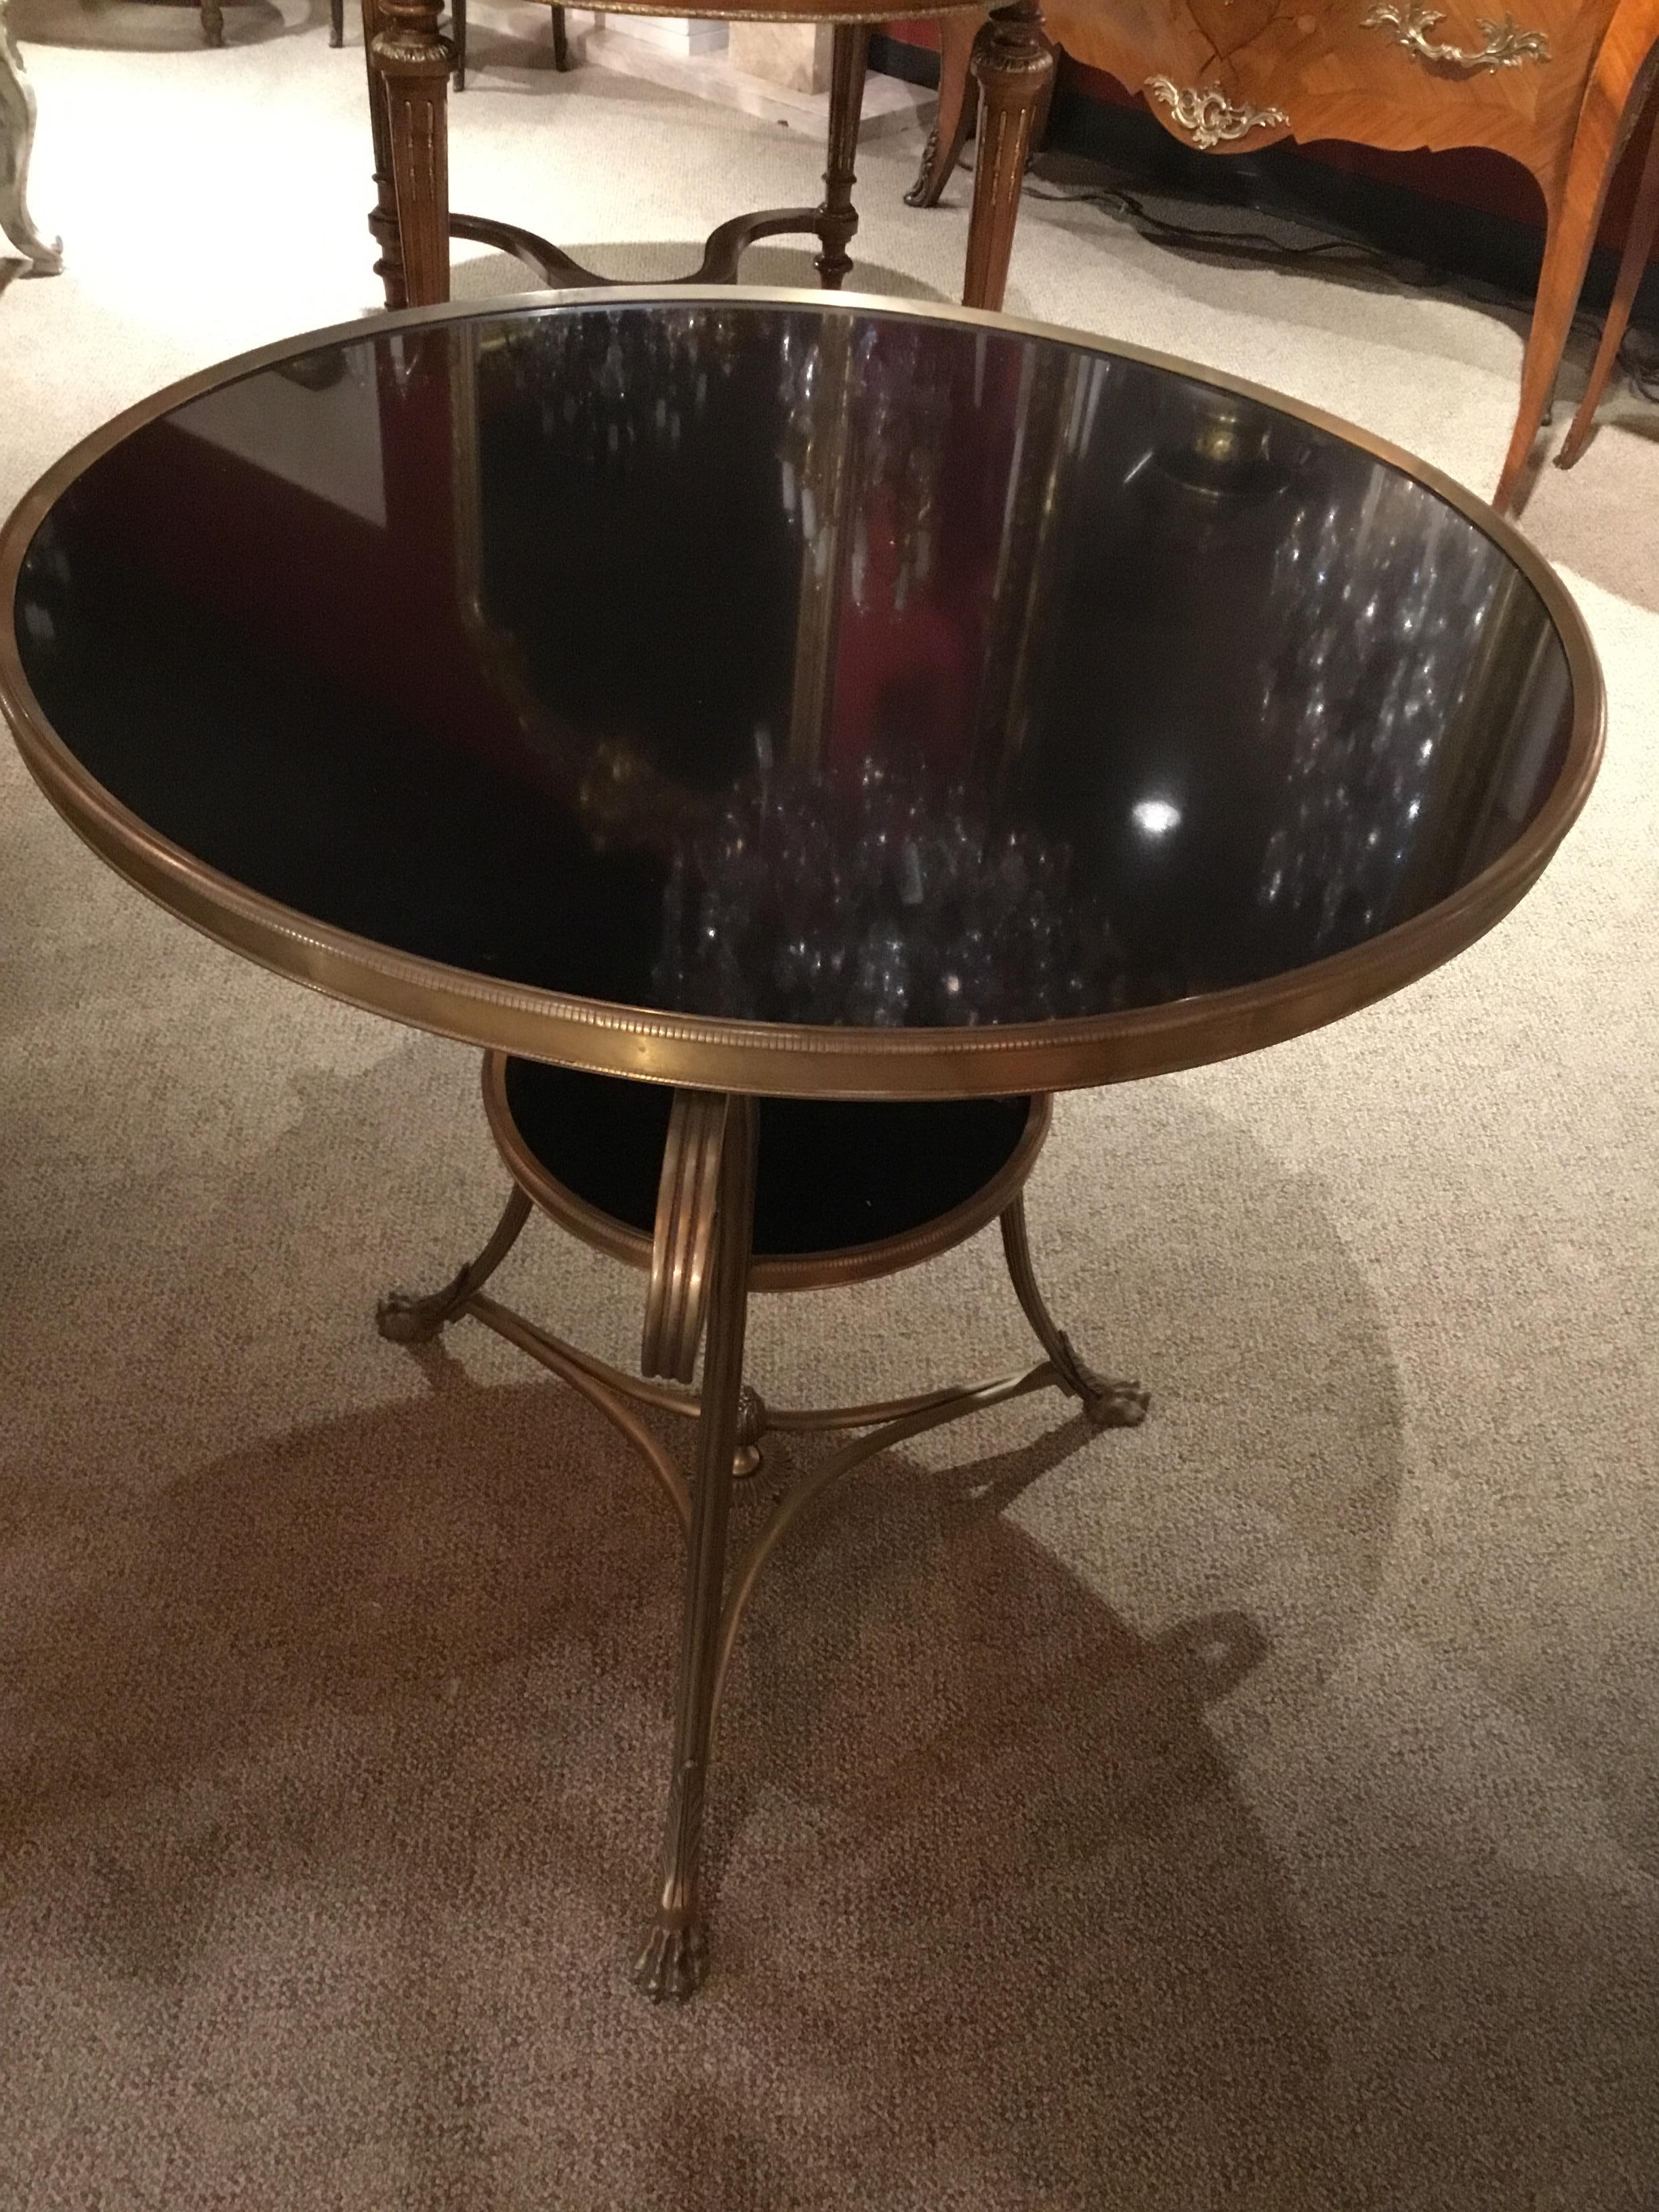 Pair of black marble top side tables with bronze molded edge, raised on
Three scrolled legs with a conforming lower shelf base stretcher with
A centered finial.